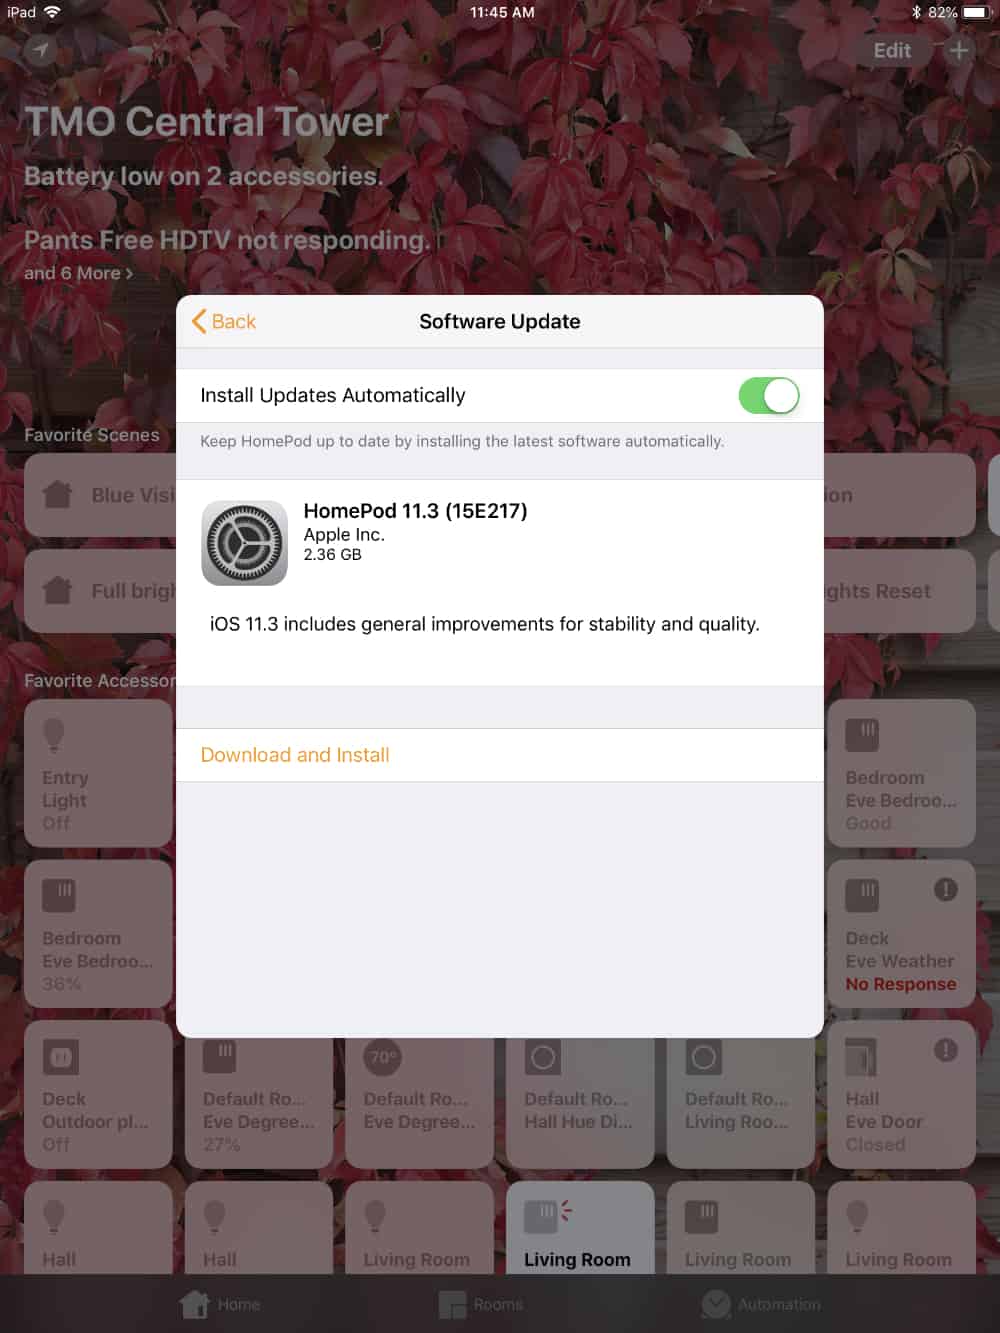 Download and install option for HomePod software update